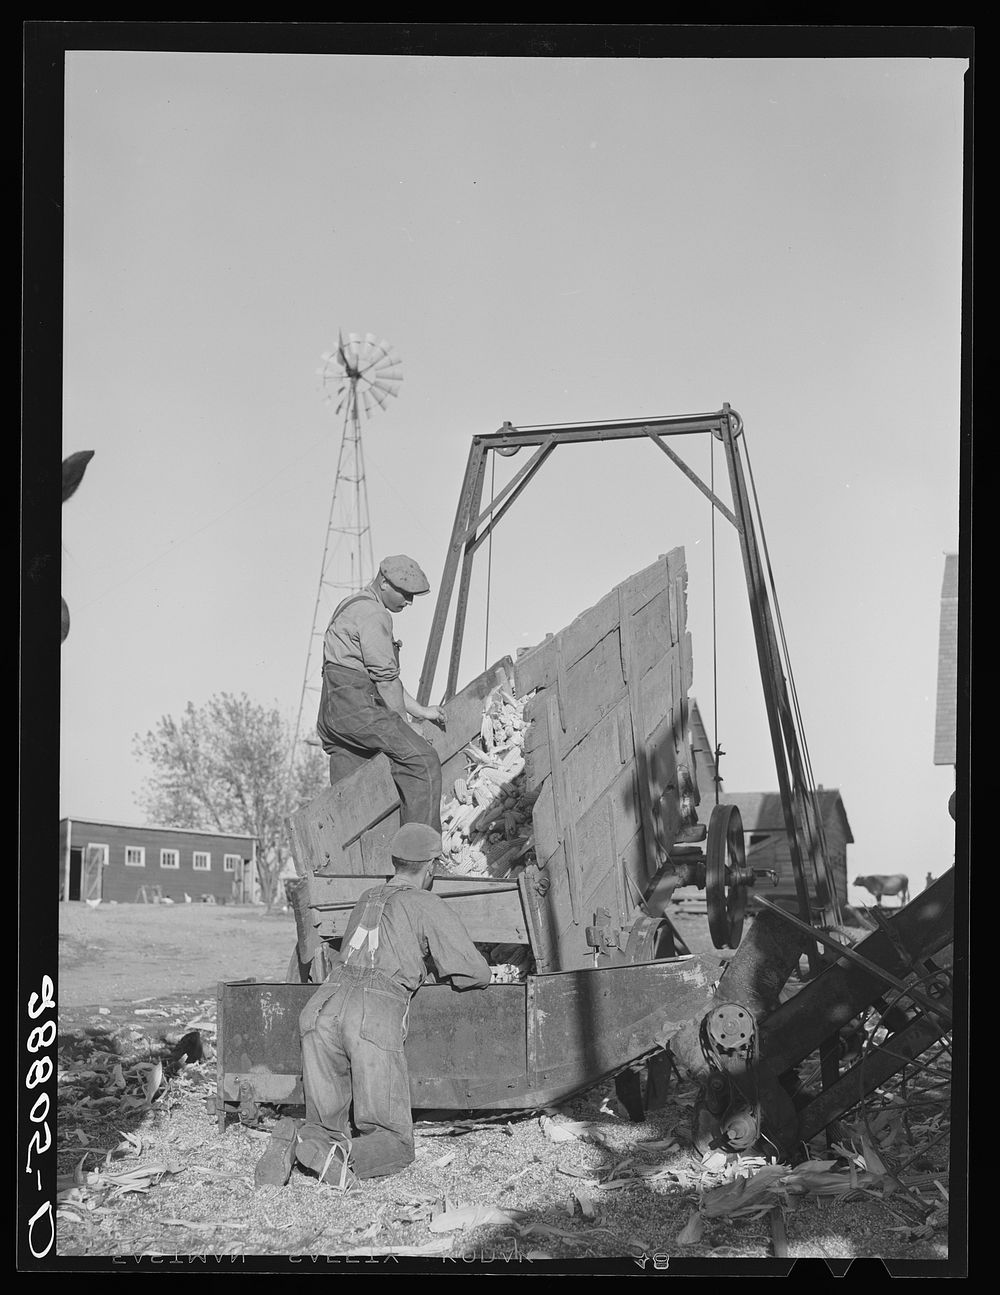 Unloading corn into elevator for storage in crib. Grundy County, Iowa. Sourced from the Library of Congress.